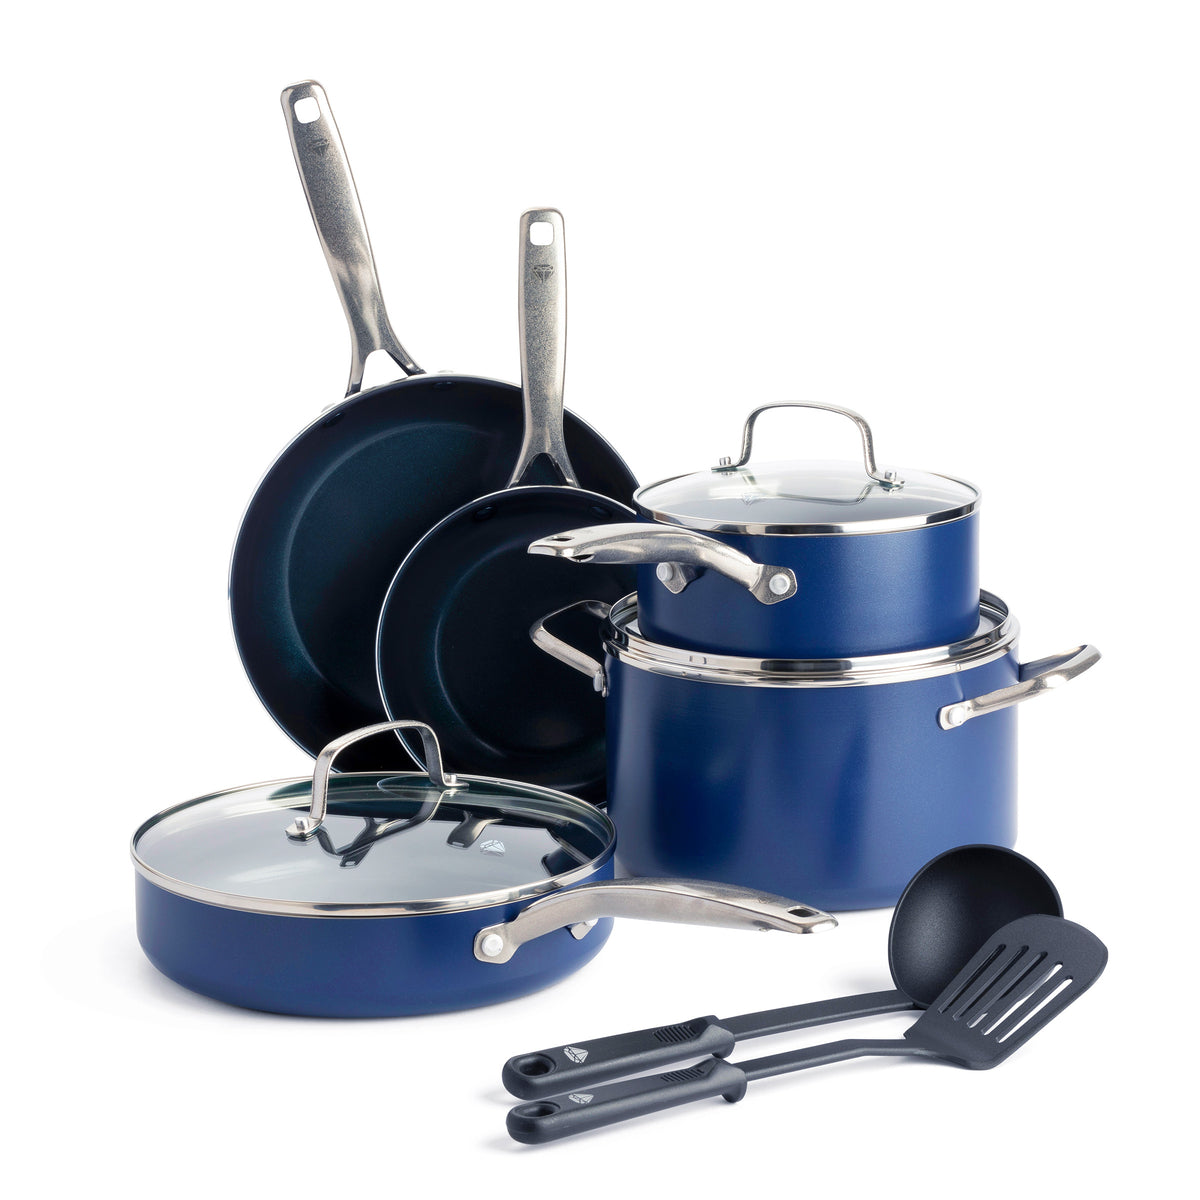 Blue Diamond Classic Diamond-Infused Ceramic Cookware Review - Consumer  Reports